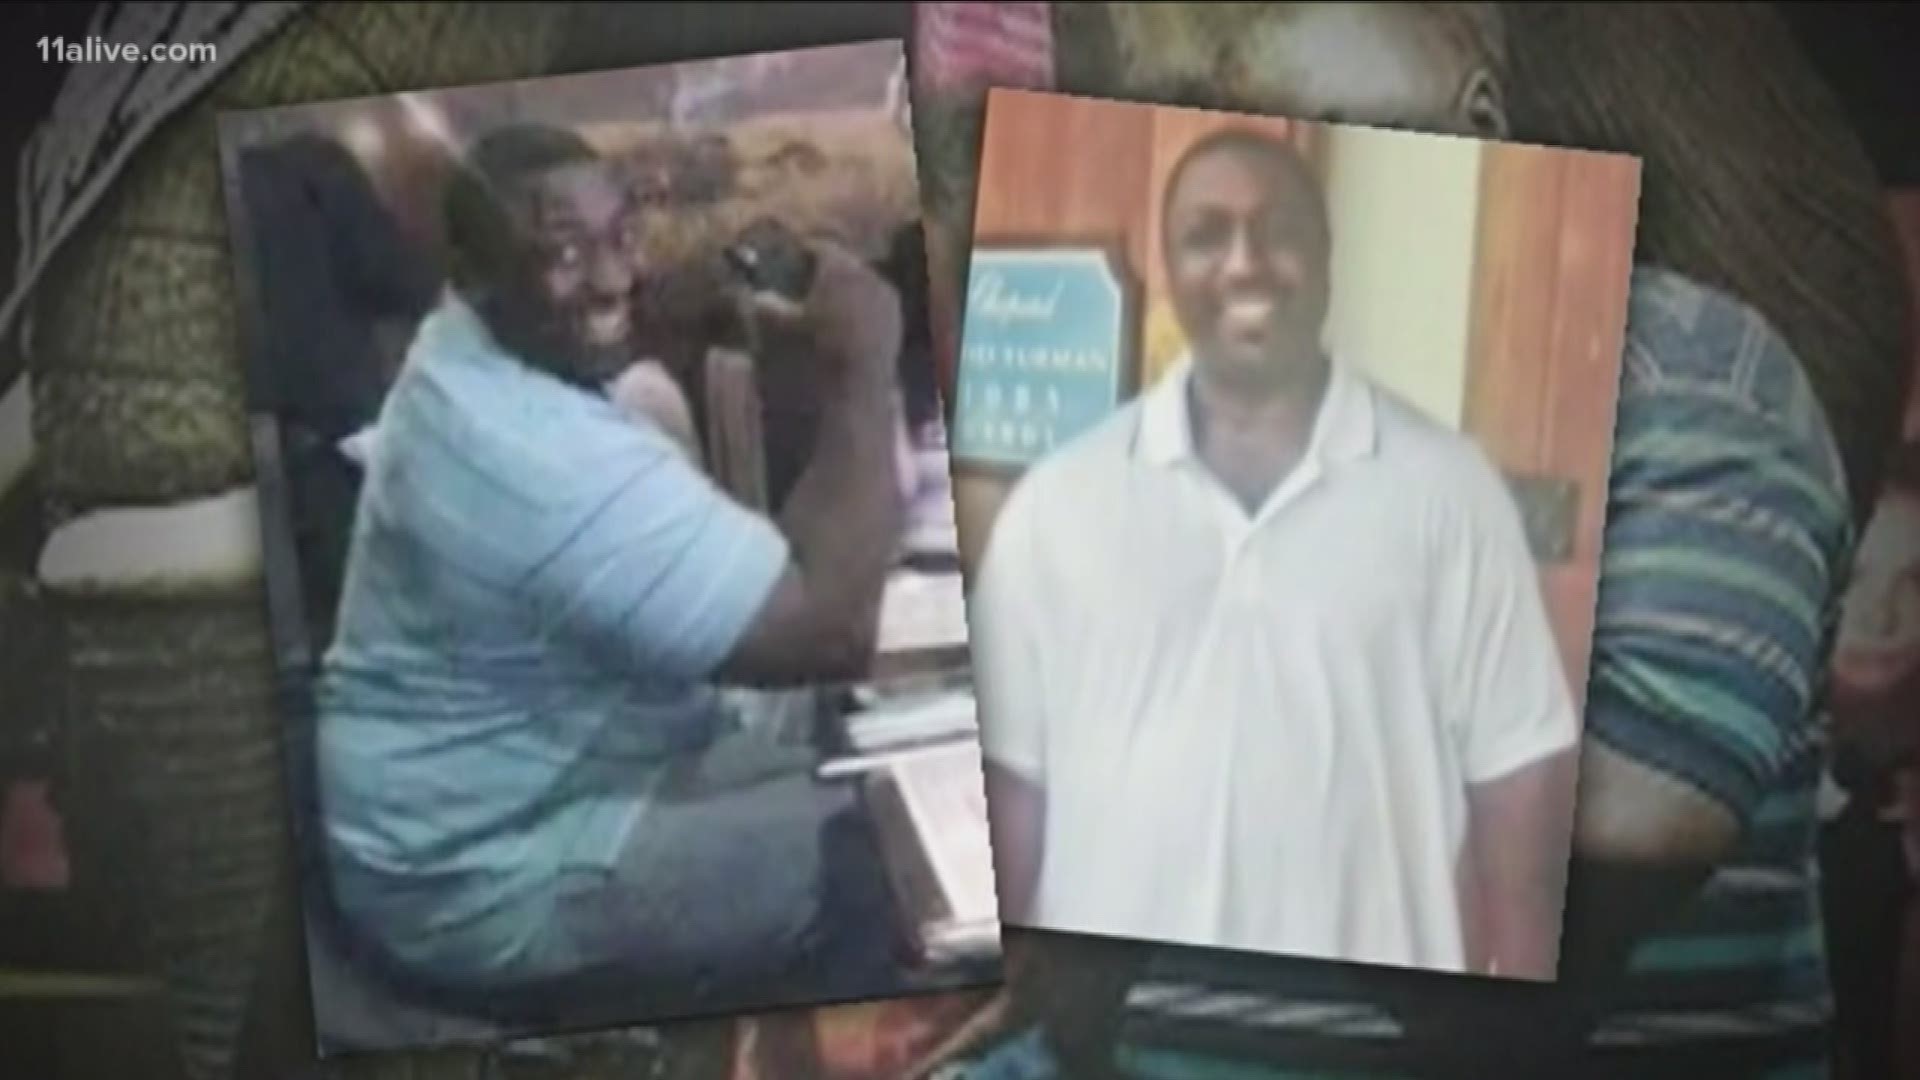 Federal prosecutors won't bring civil rights charges against a New York City police officer in the 2014 chokehold death of Eric Garner, a decision made by Attorney General William Barr and announced one day before the five-year anniversary of his death, officials said.